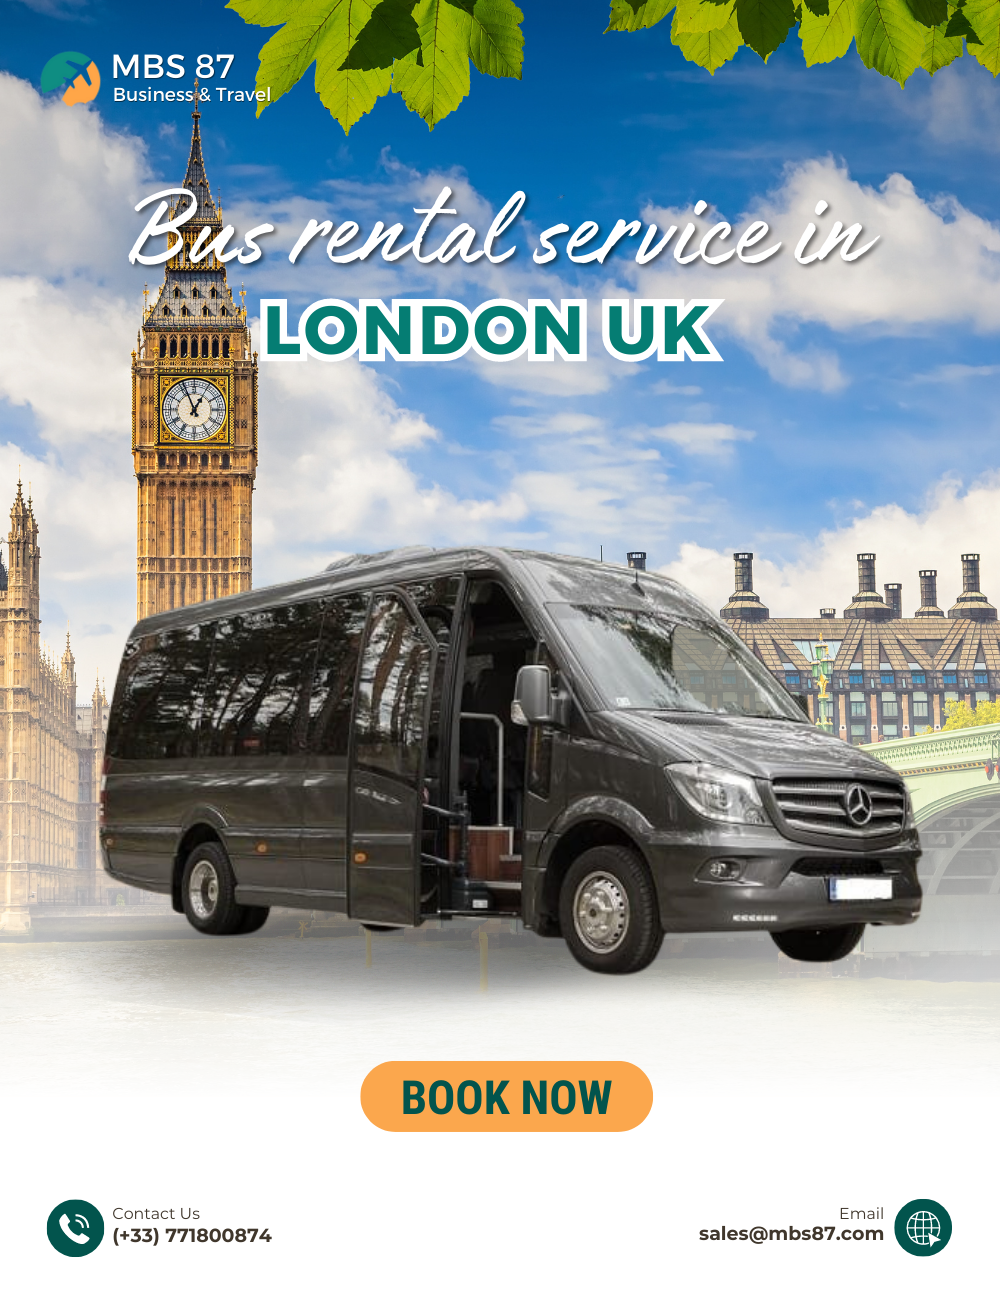 Bus rental services in London UK